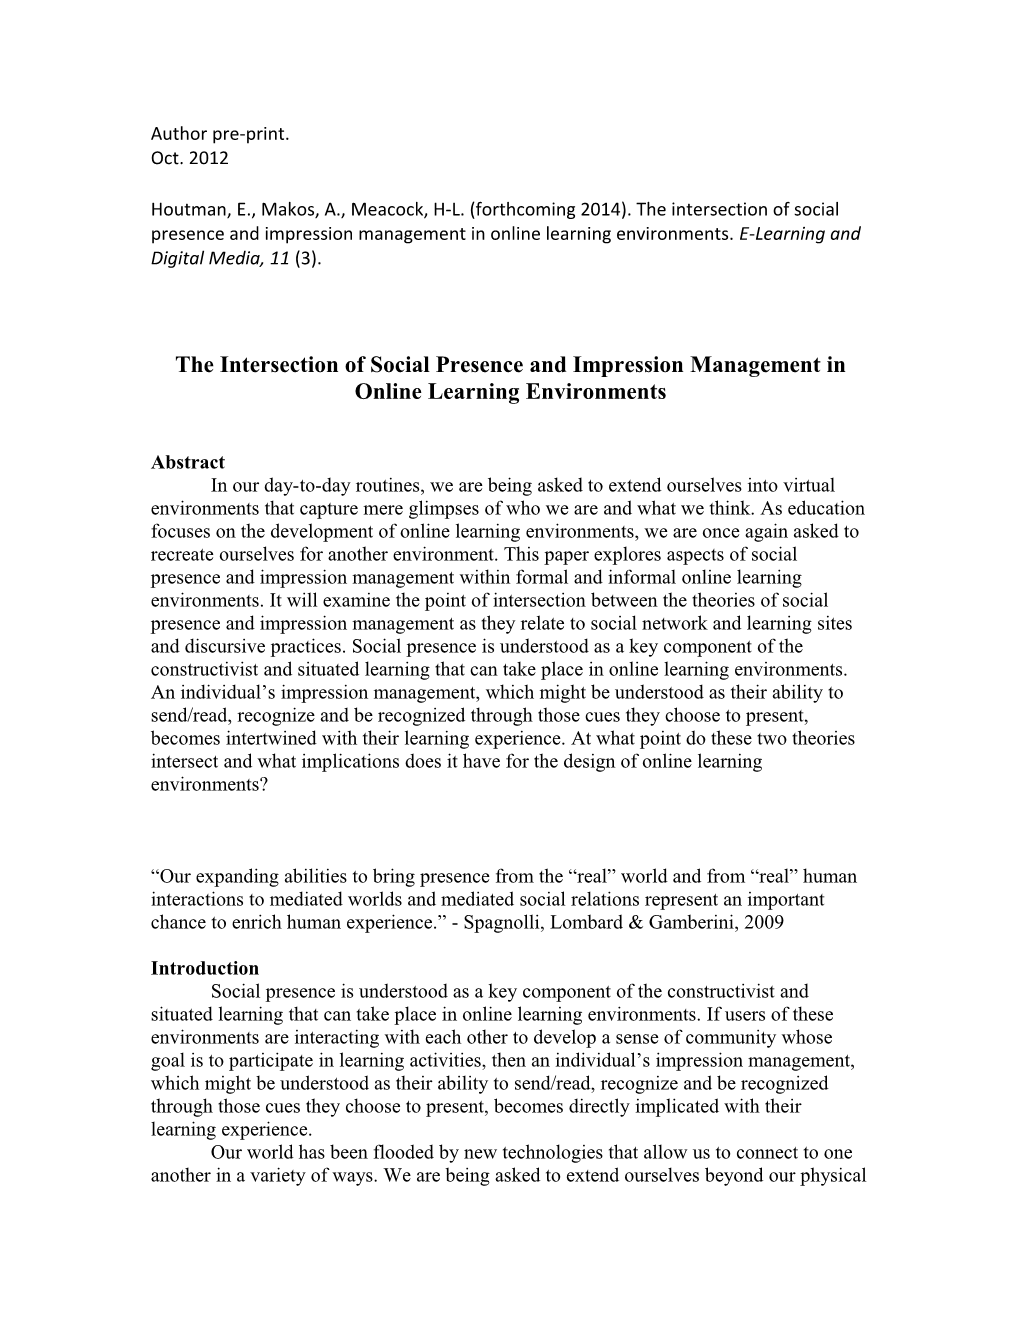 The Intersection of Social Presence and Impression Management in Online Learning Environments